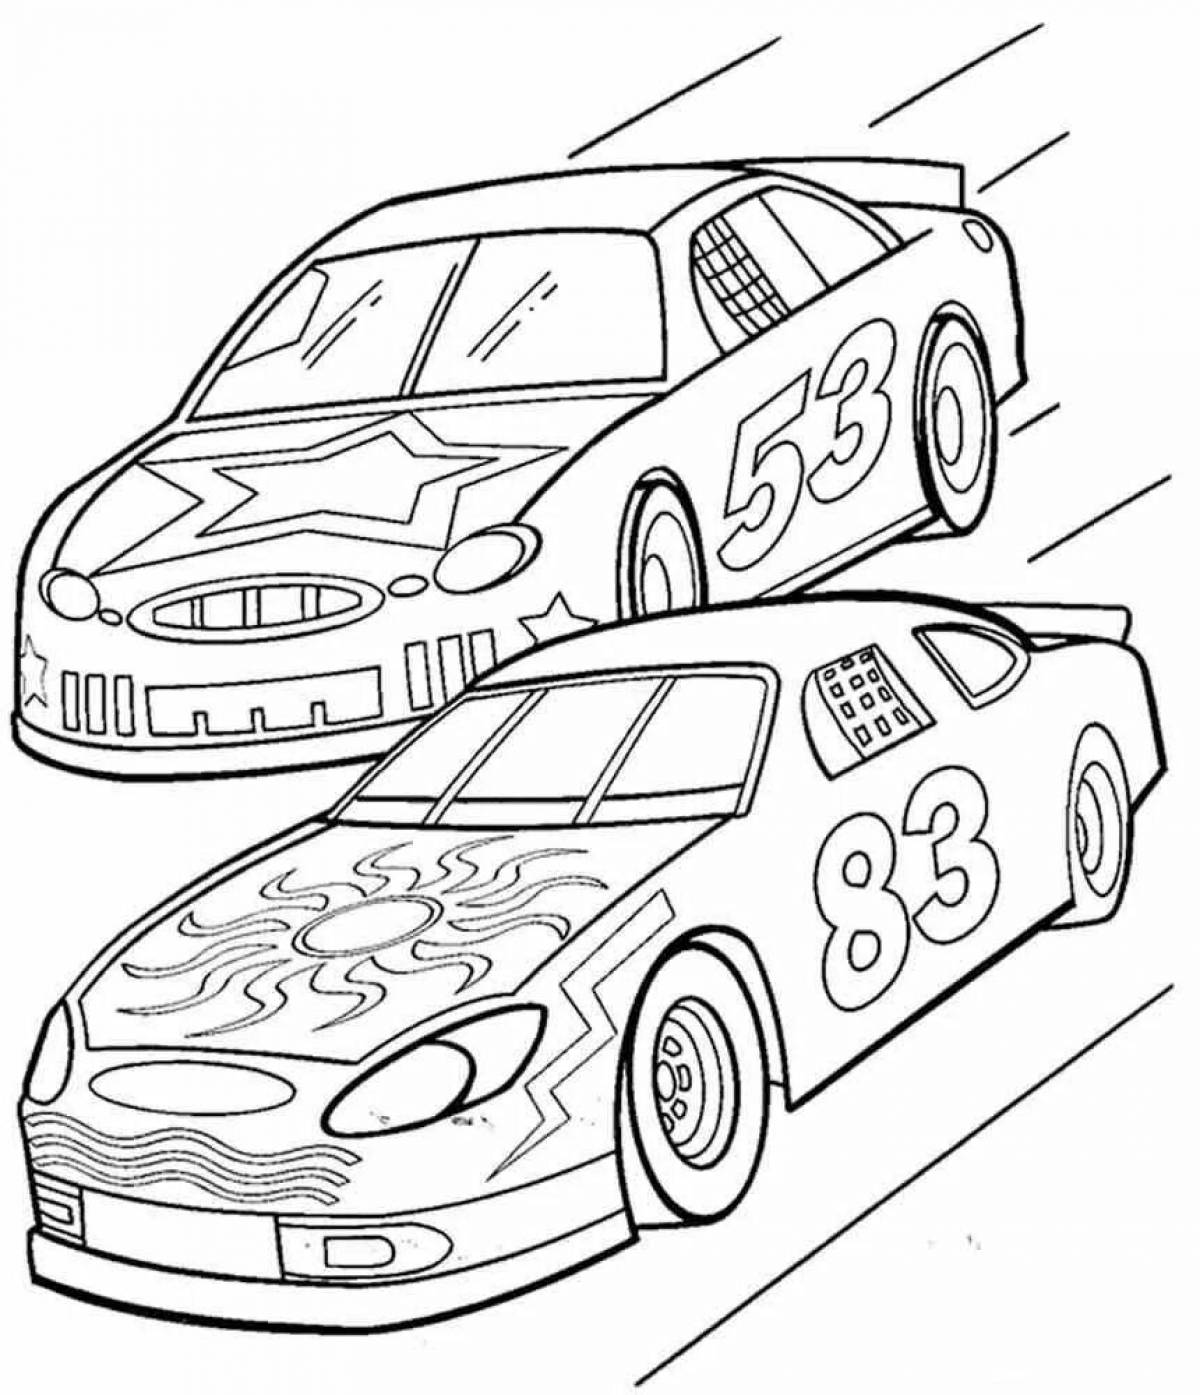 Fun car coloring game for 4-5 year old boys